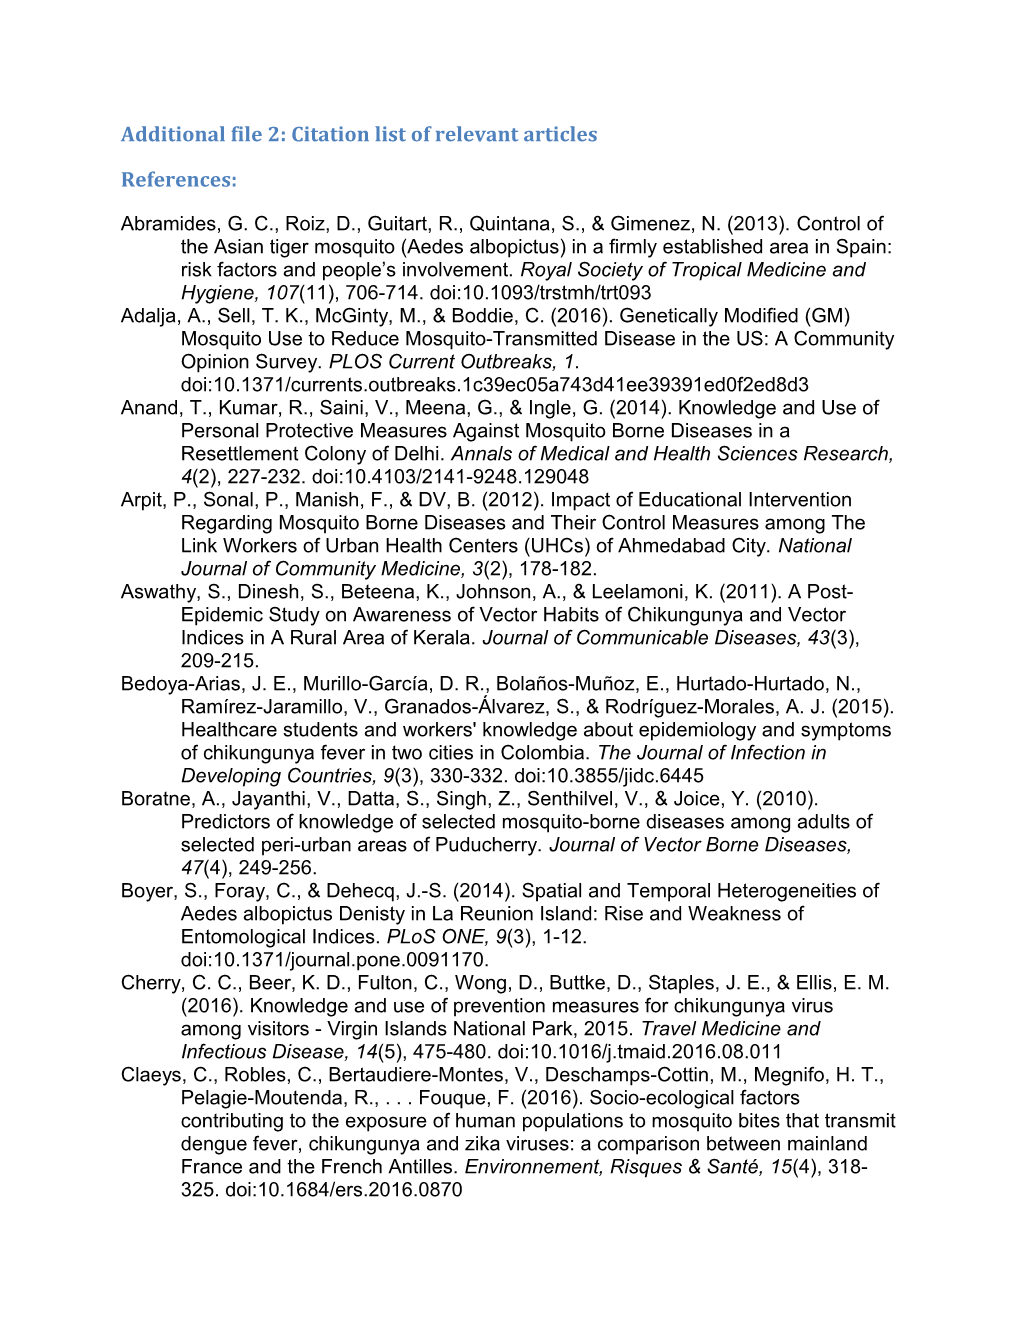 Additional File 2: Citation List of Relevant Articles